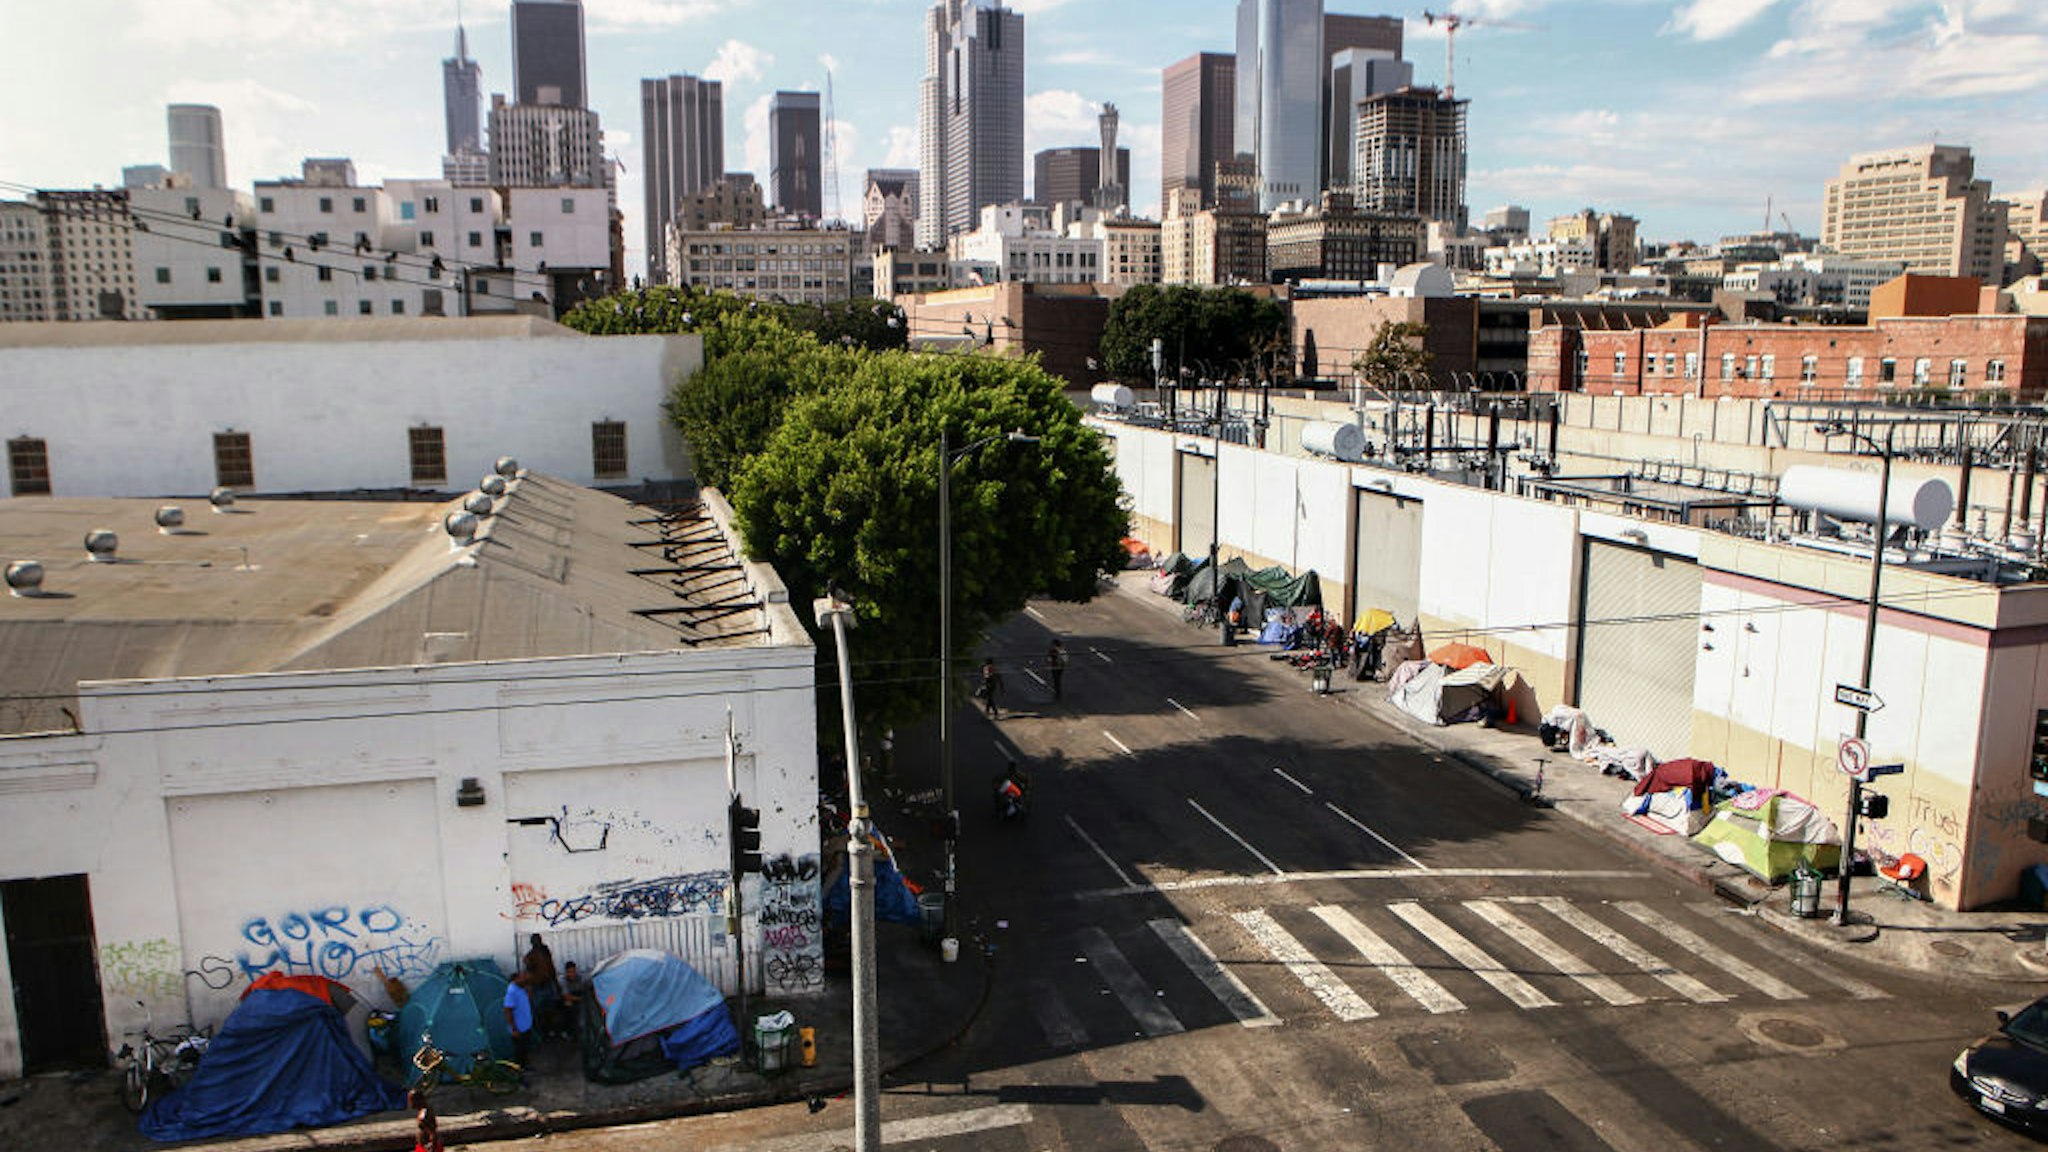 A man walks past a homeless tent encampment in Skid Row on September 16, 2019 in Los Angeles, California.